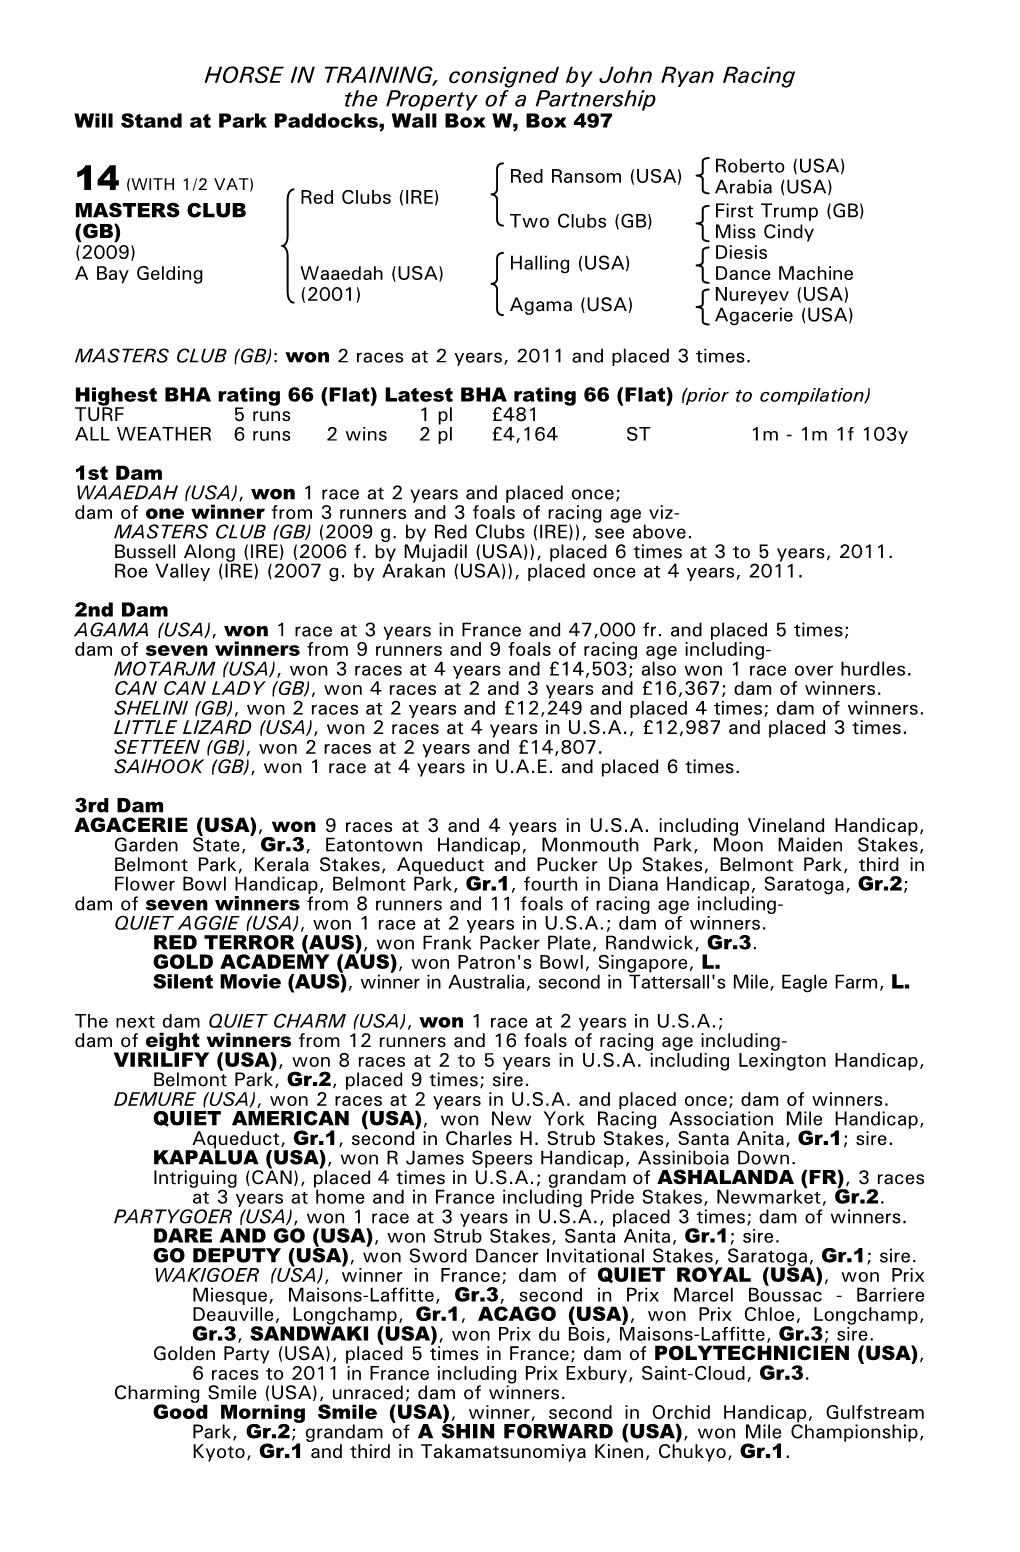 HORSE in TRAINING, Consigned by John Ryan Racing the Property of a Partnership Will Stand at Park Paddocks, Wall Box W, Box 497